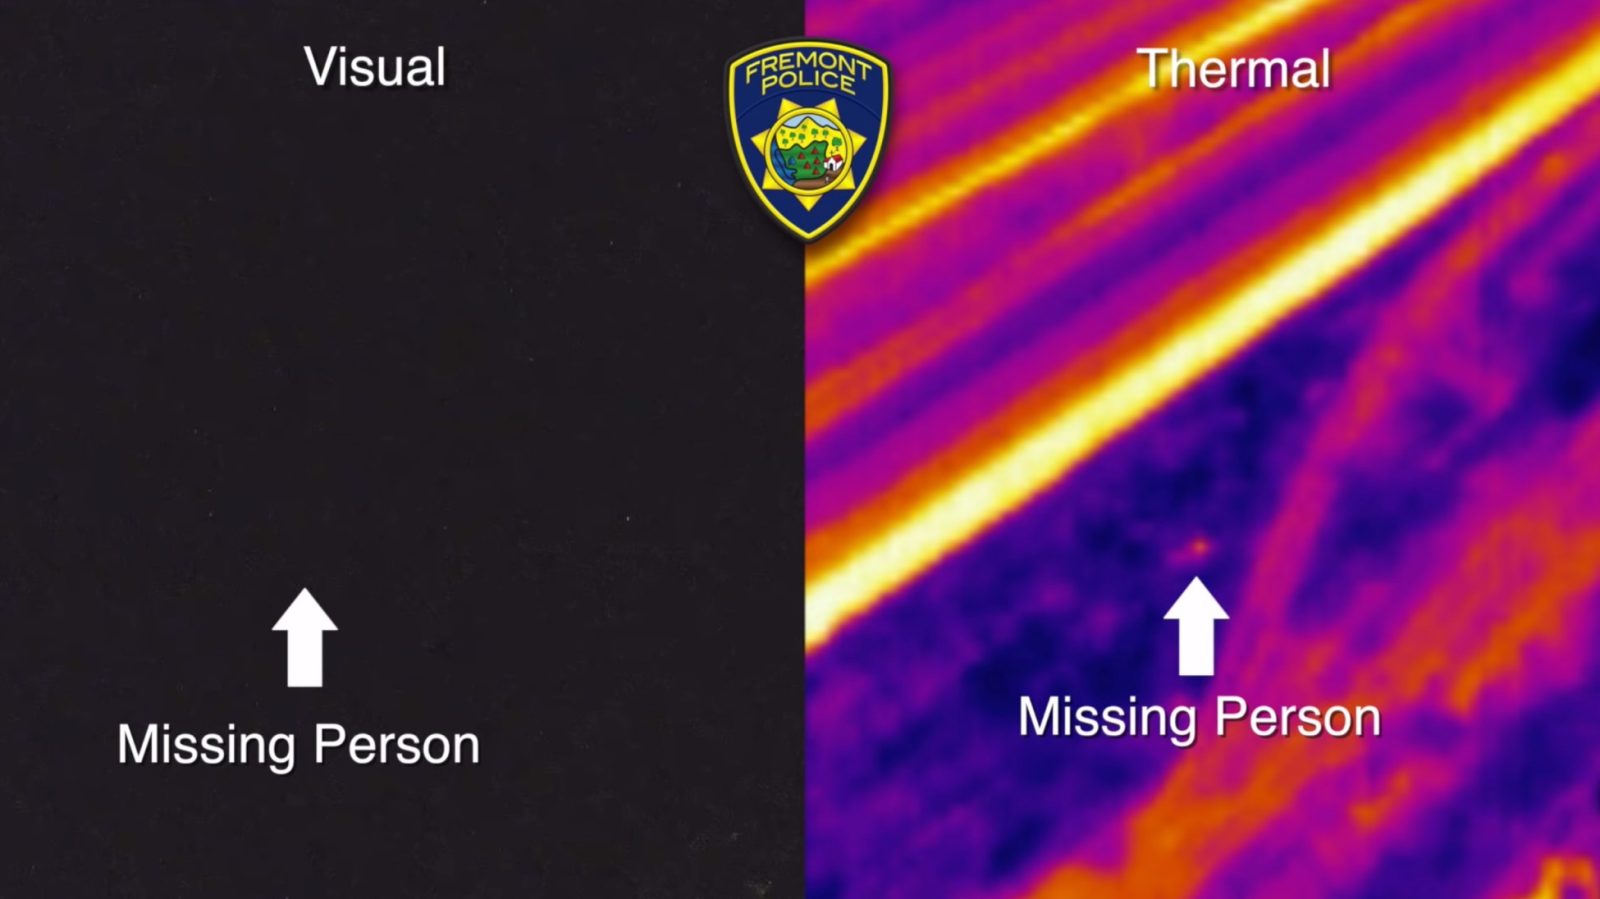 Fremont Police use drone with FLIR thermal camera to find missing teen